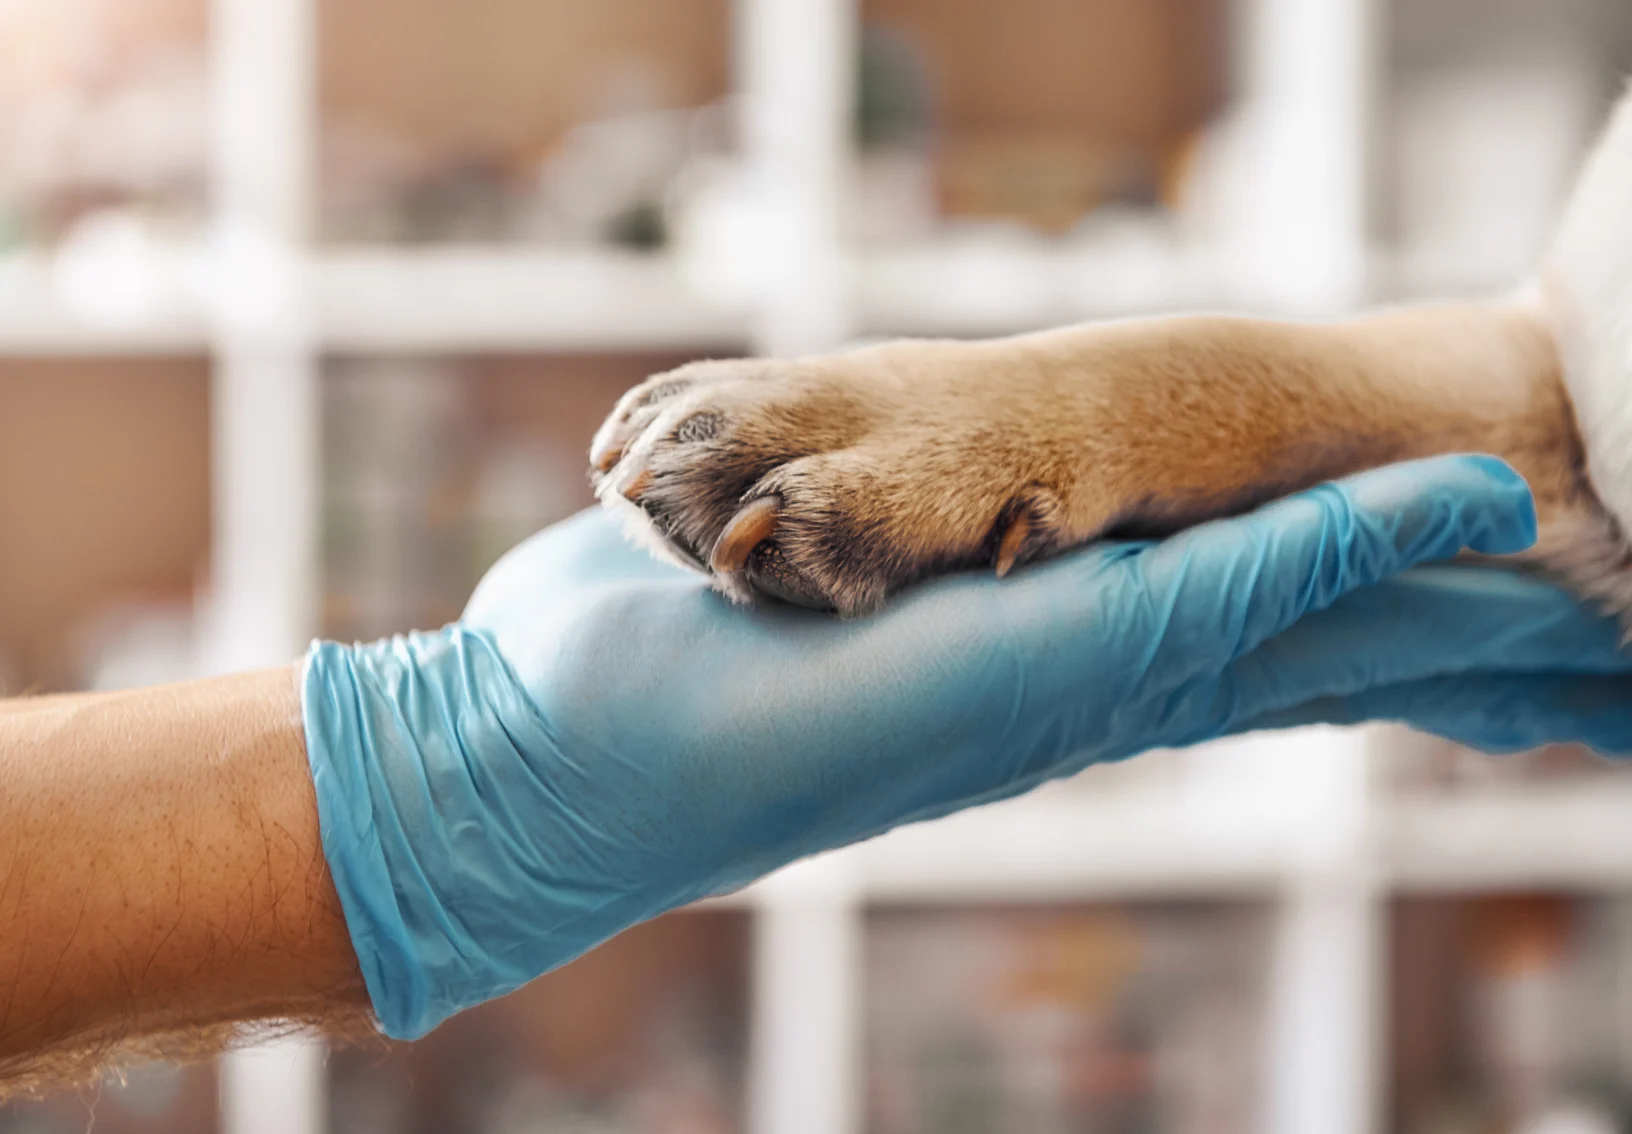 dog paw on top of staff member's hand wearing glove